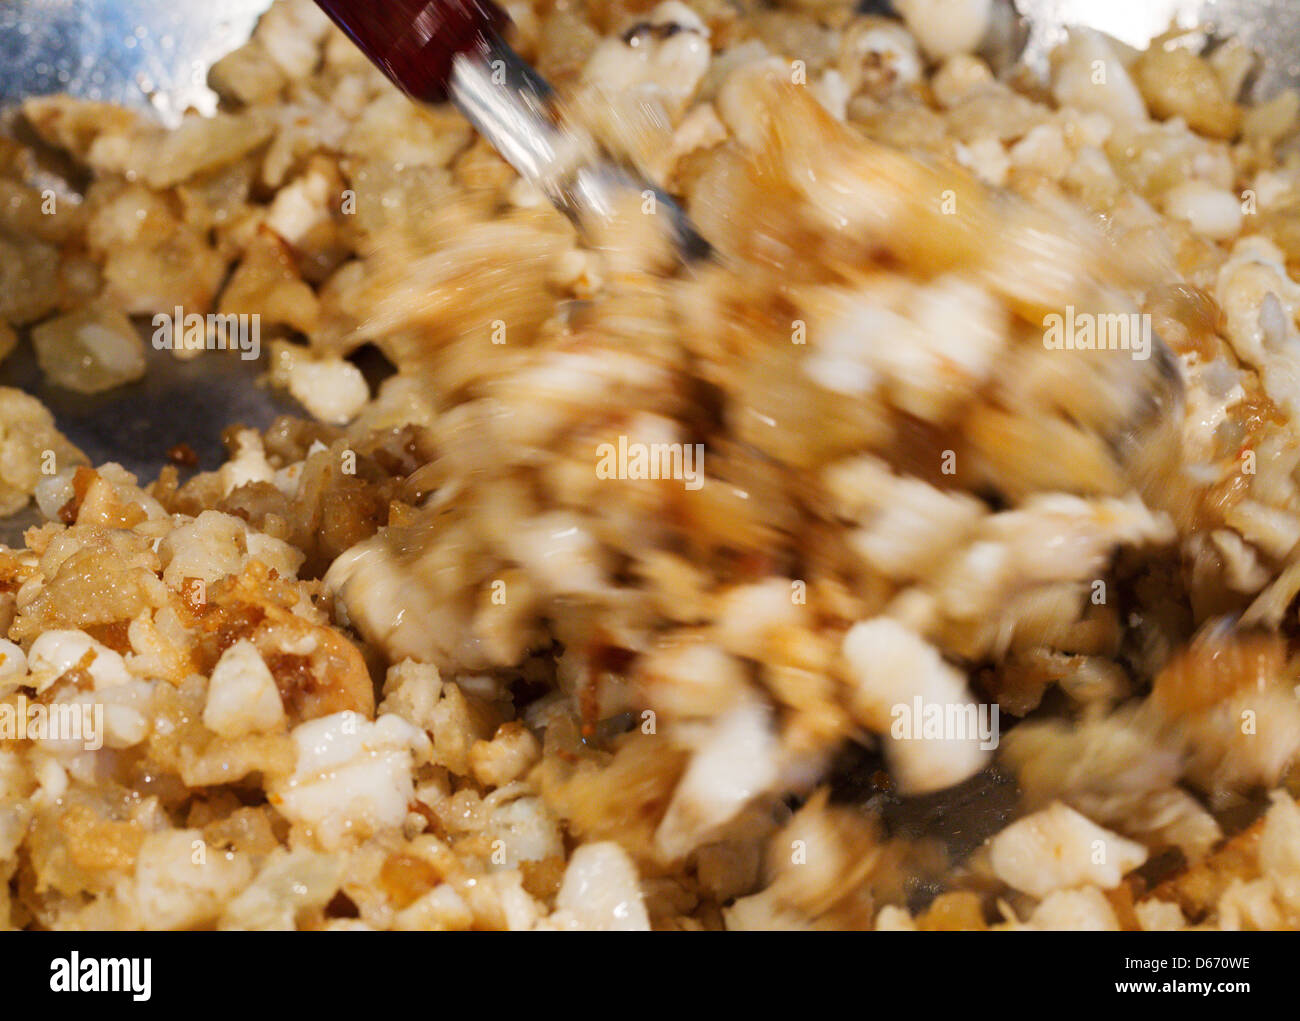 Fried cracklings actively mixed in a pan Stock Photo